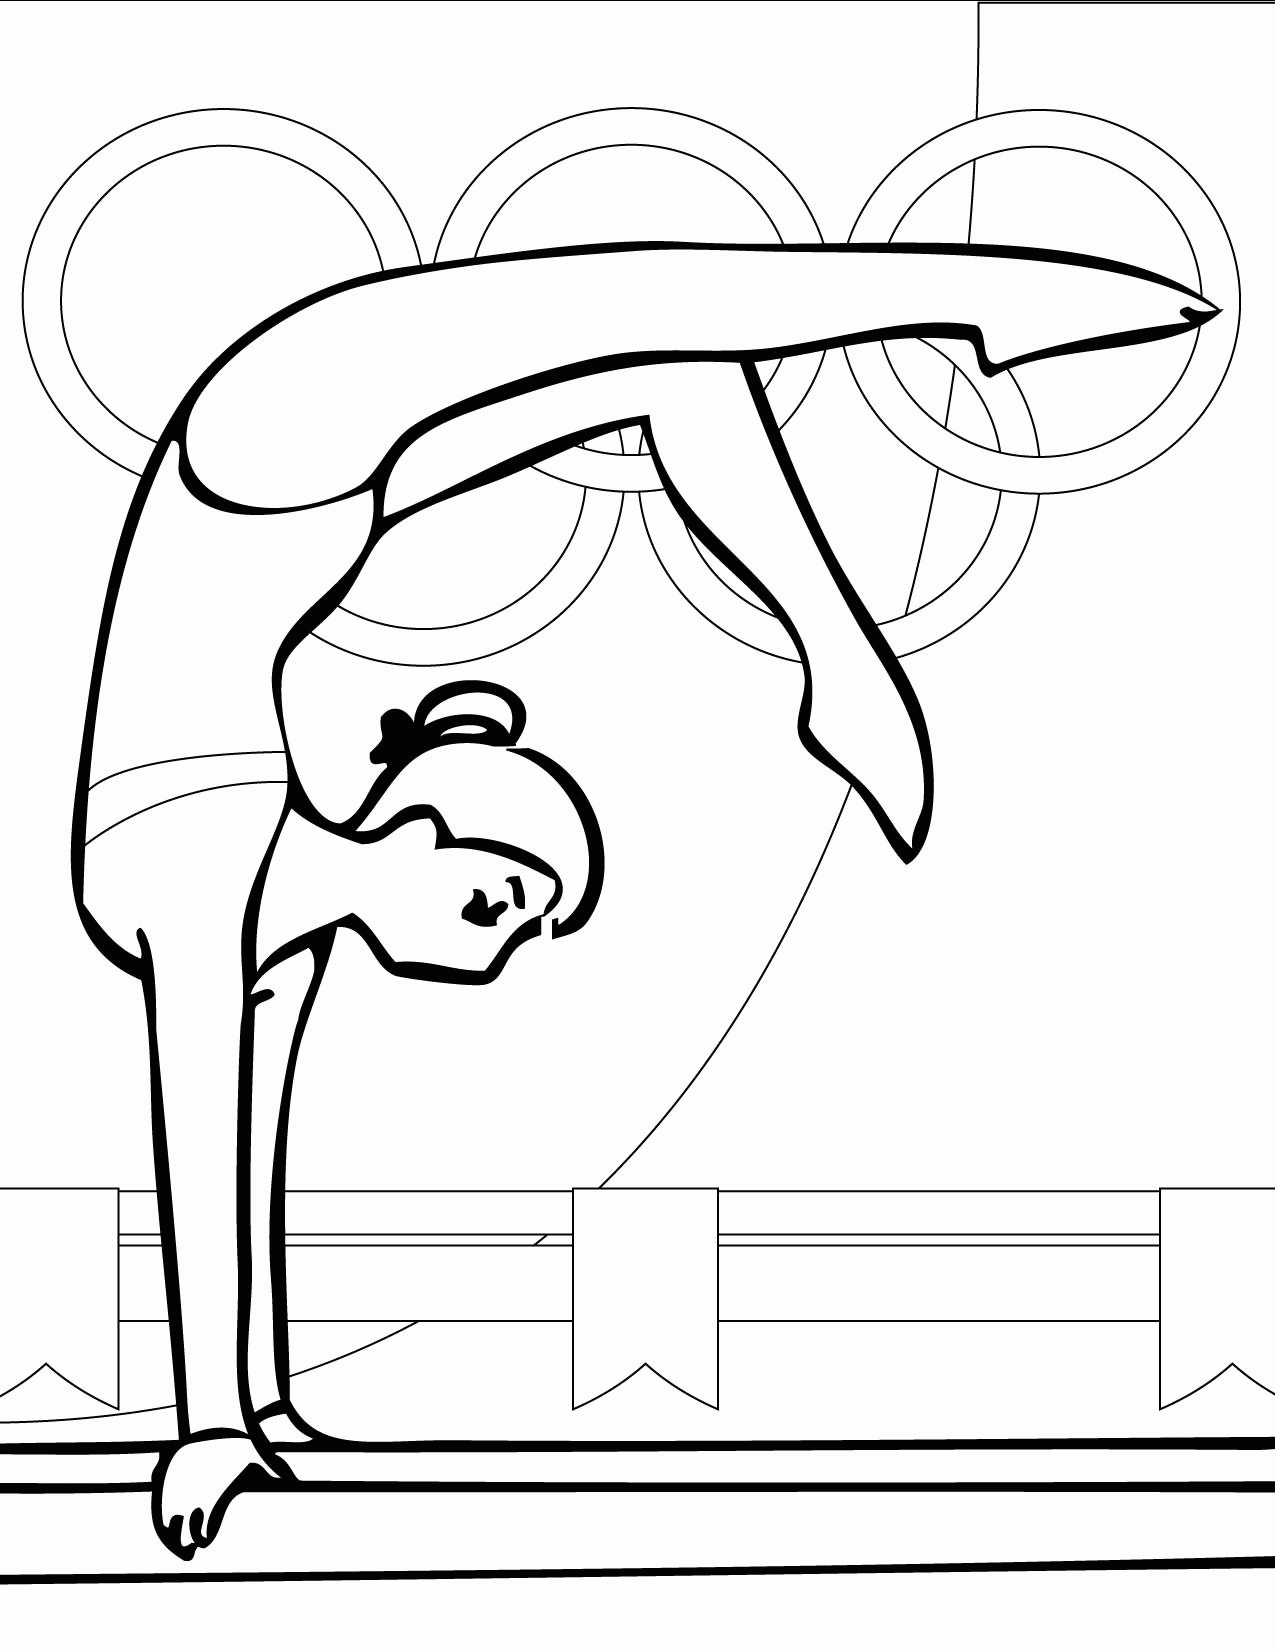 HD Gymnastics Coloring Pages to Print | Best Coloring Page Site